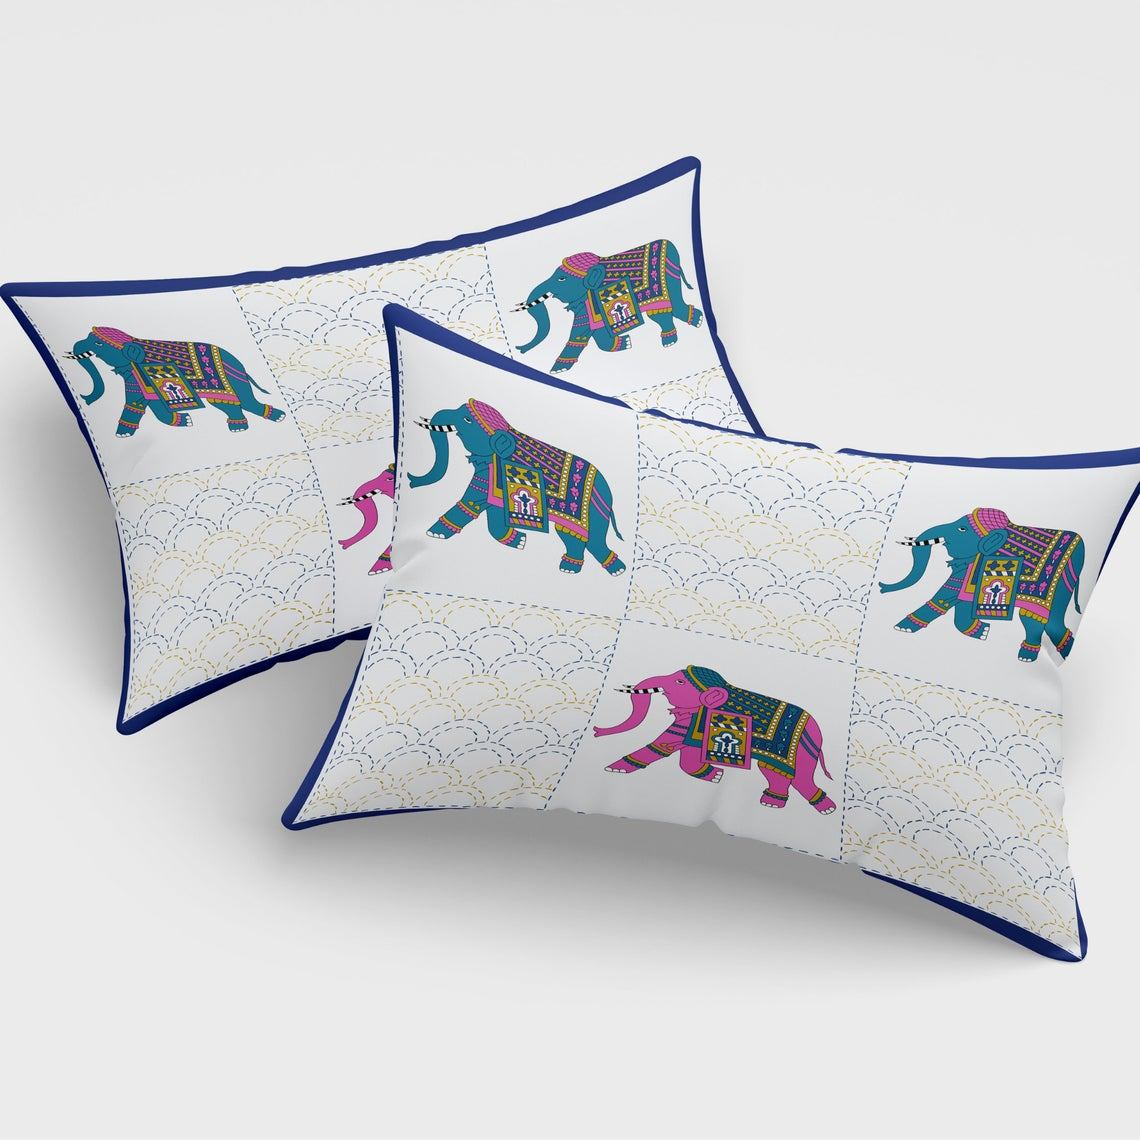 Buy Elephant Animal Printed Bedsheet With Set of 2 Pillow Cover